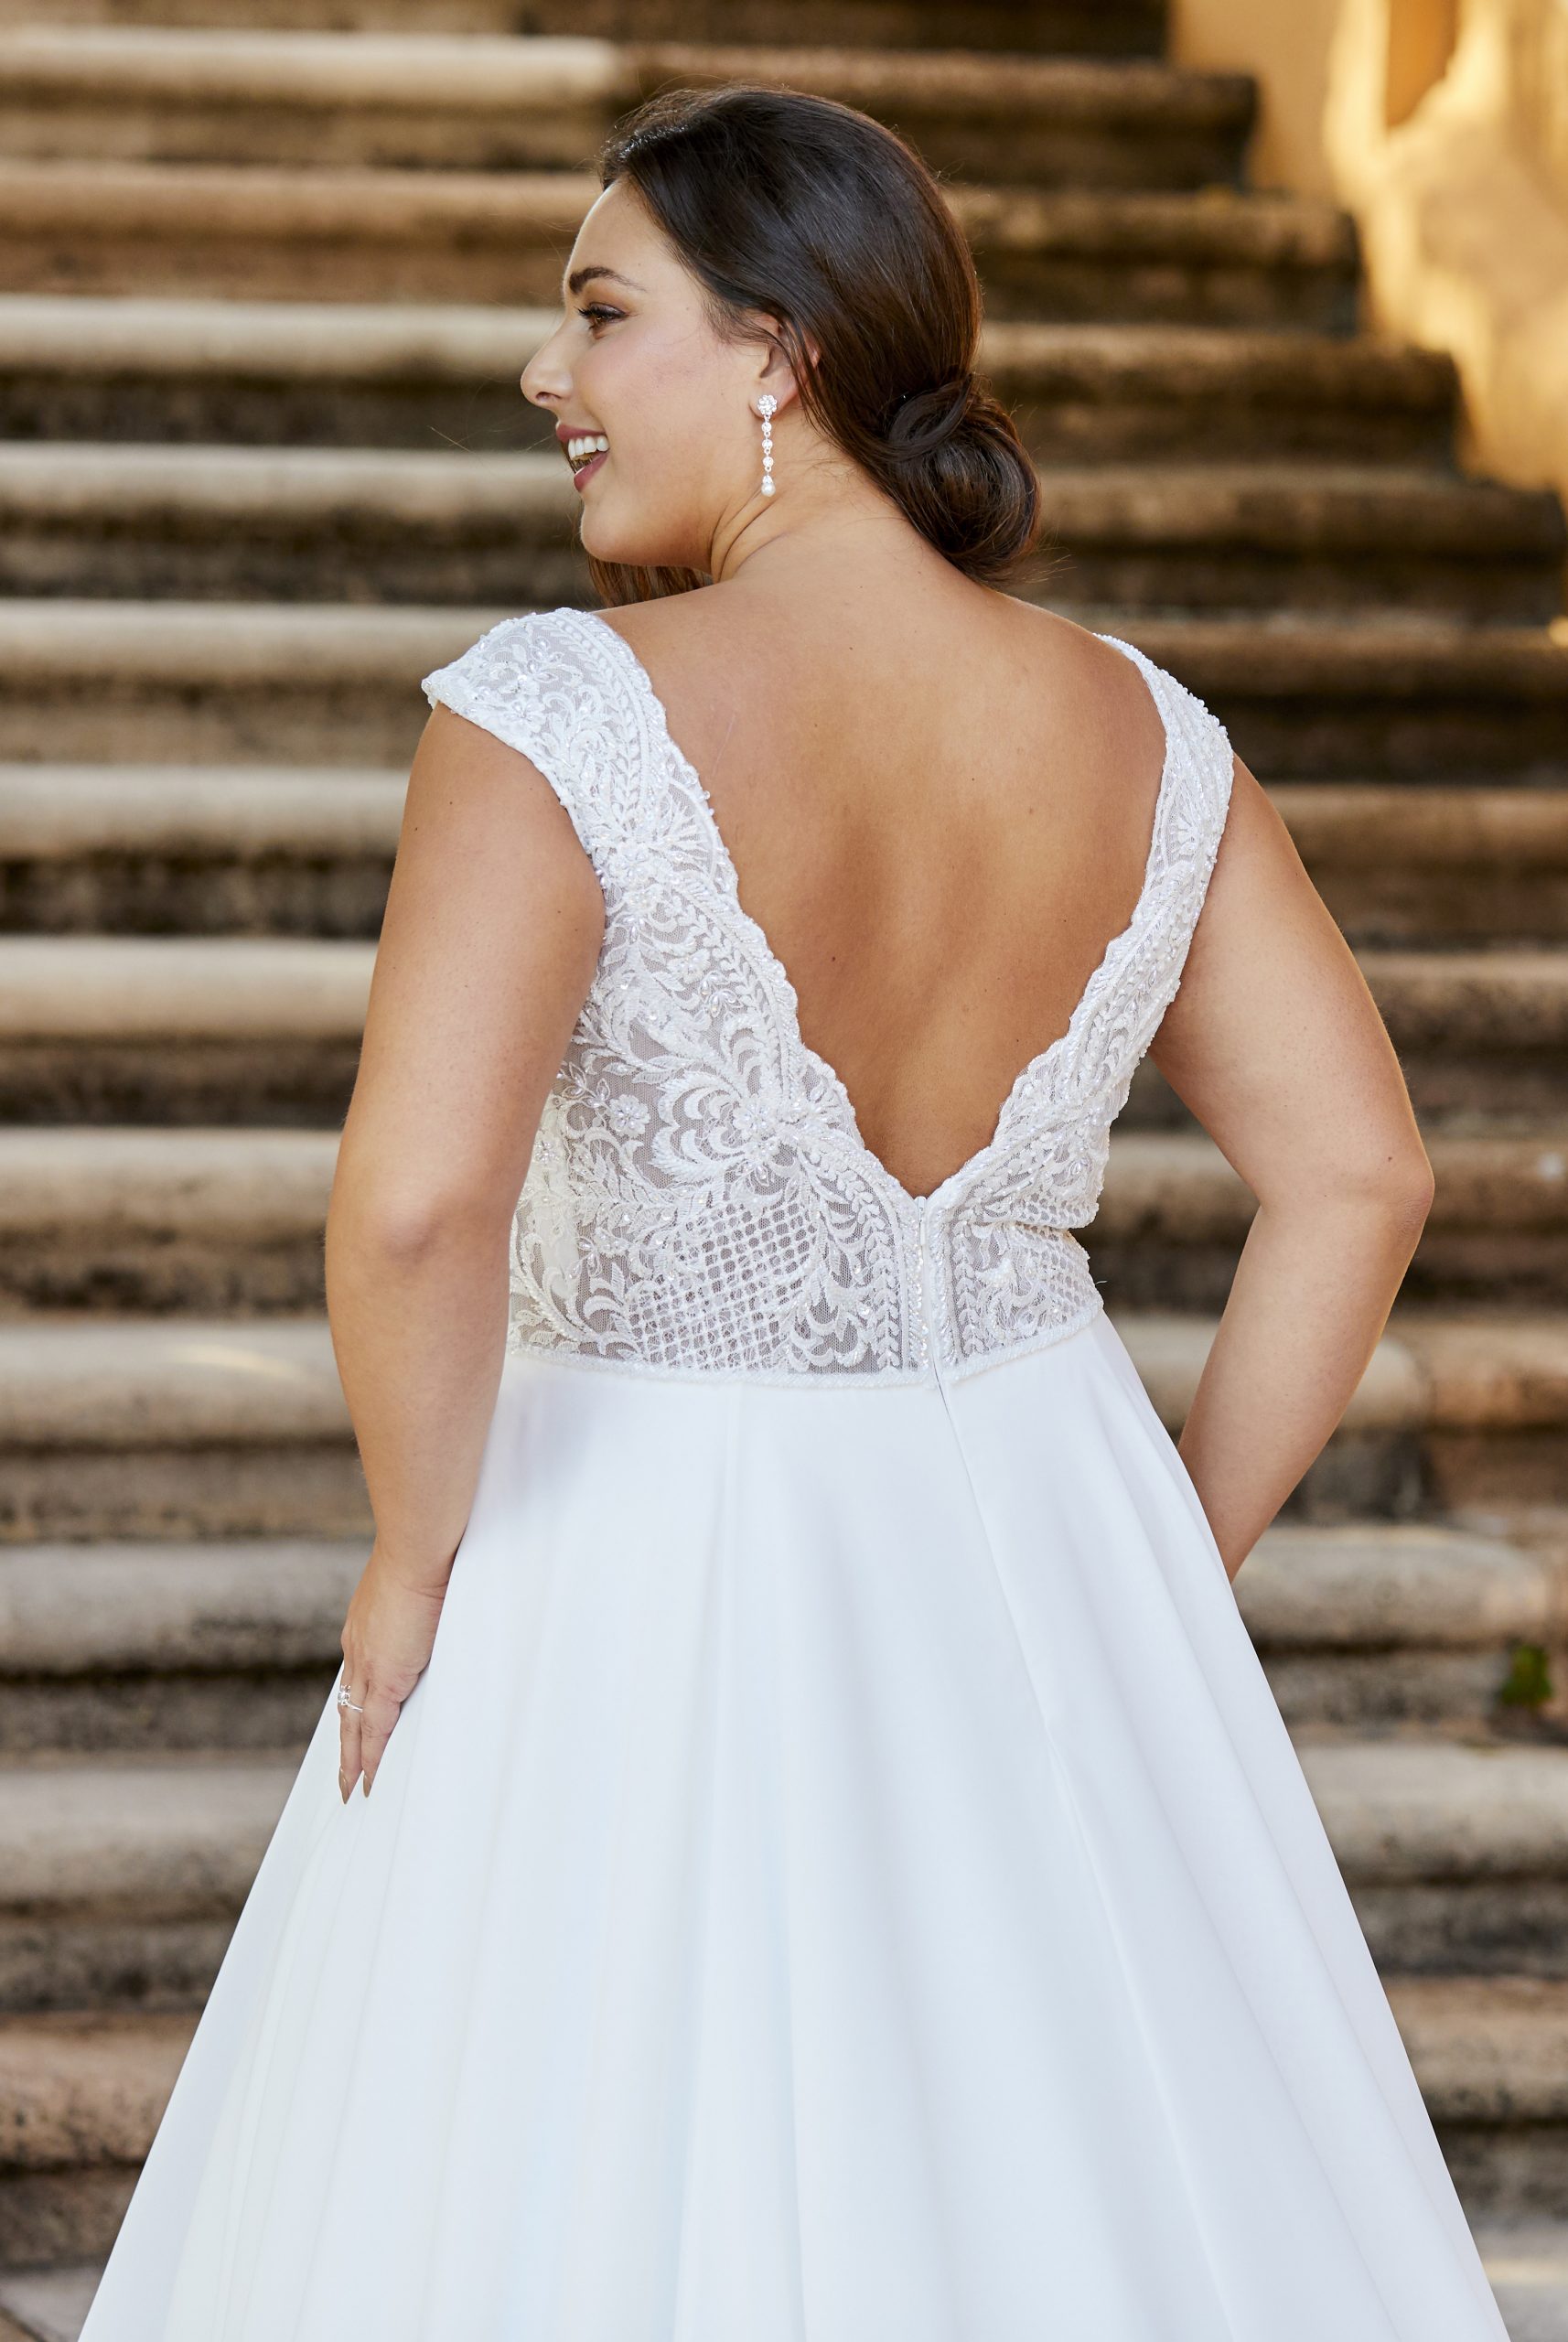 The back detail of our designers' choice of the month.